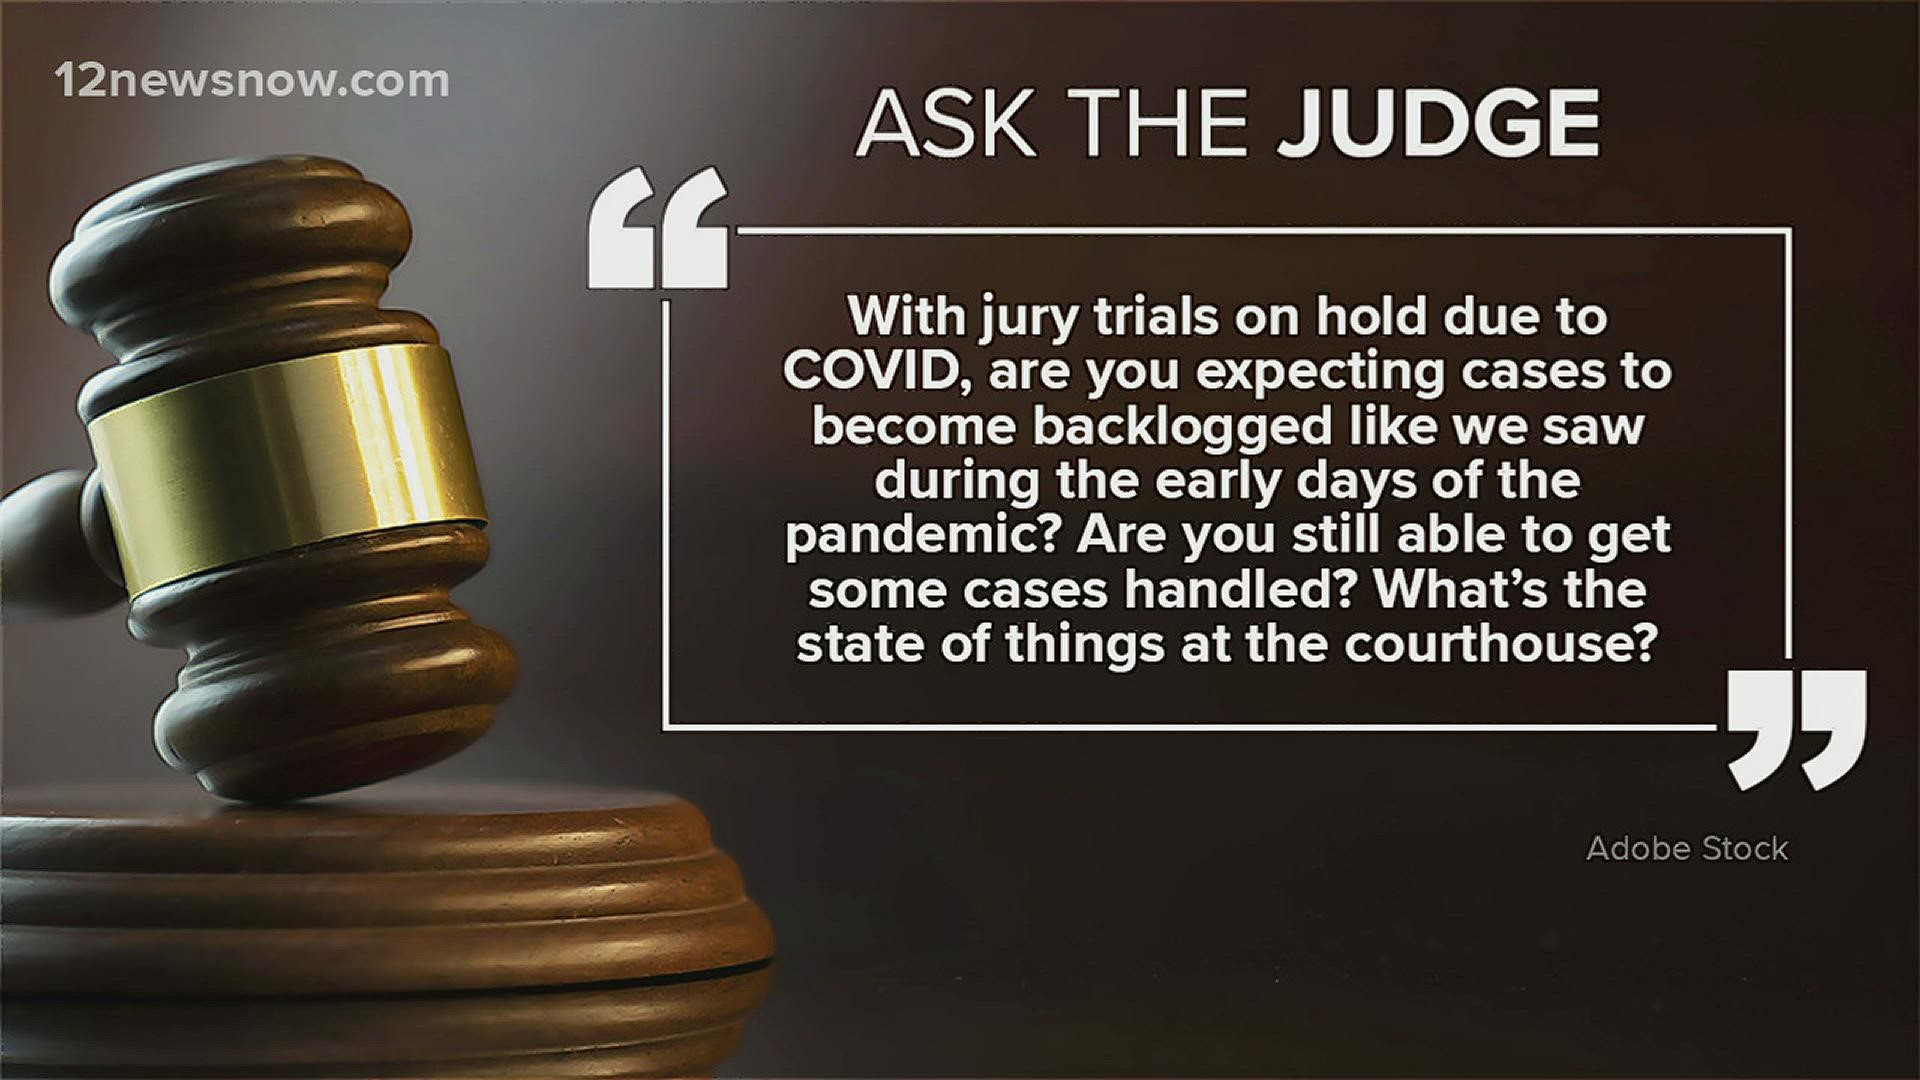 If you have any legal questions, submit them to Ask The Judge at 12NewsNow.com/AskTheJudge